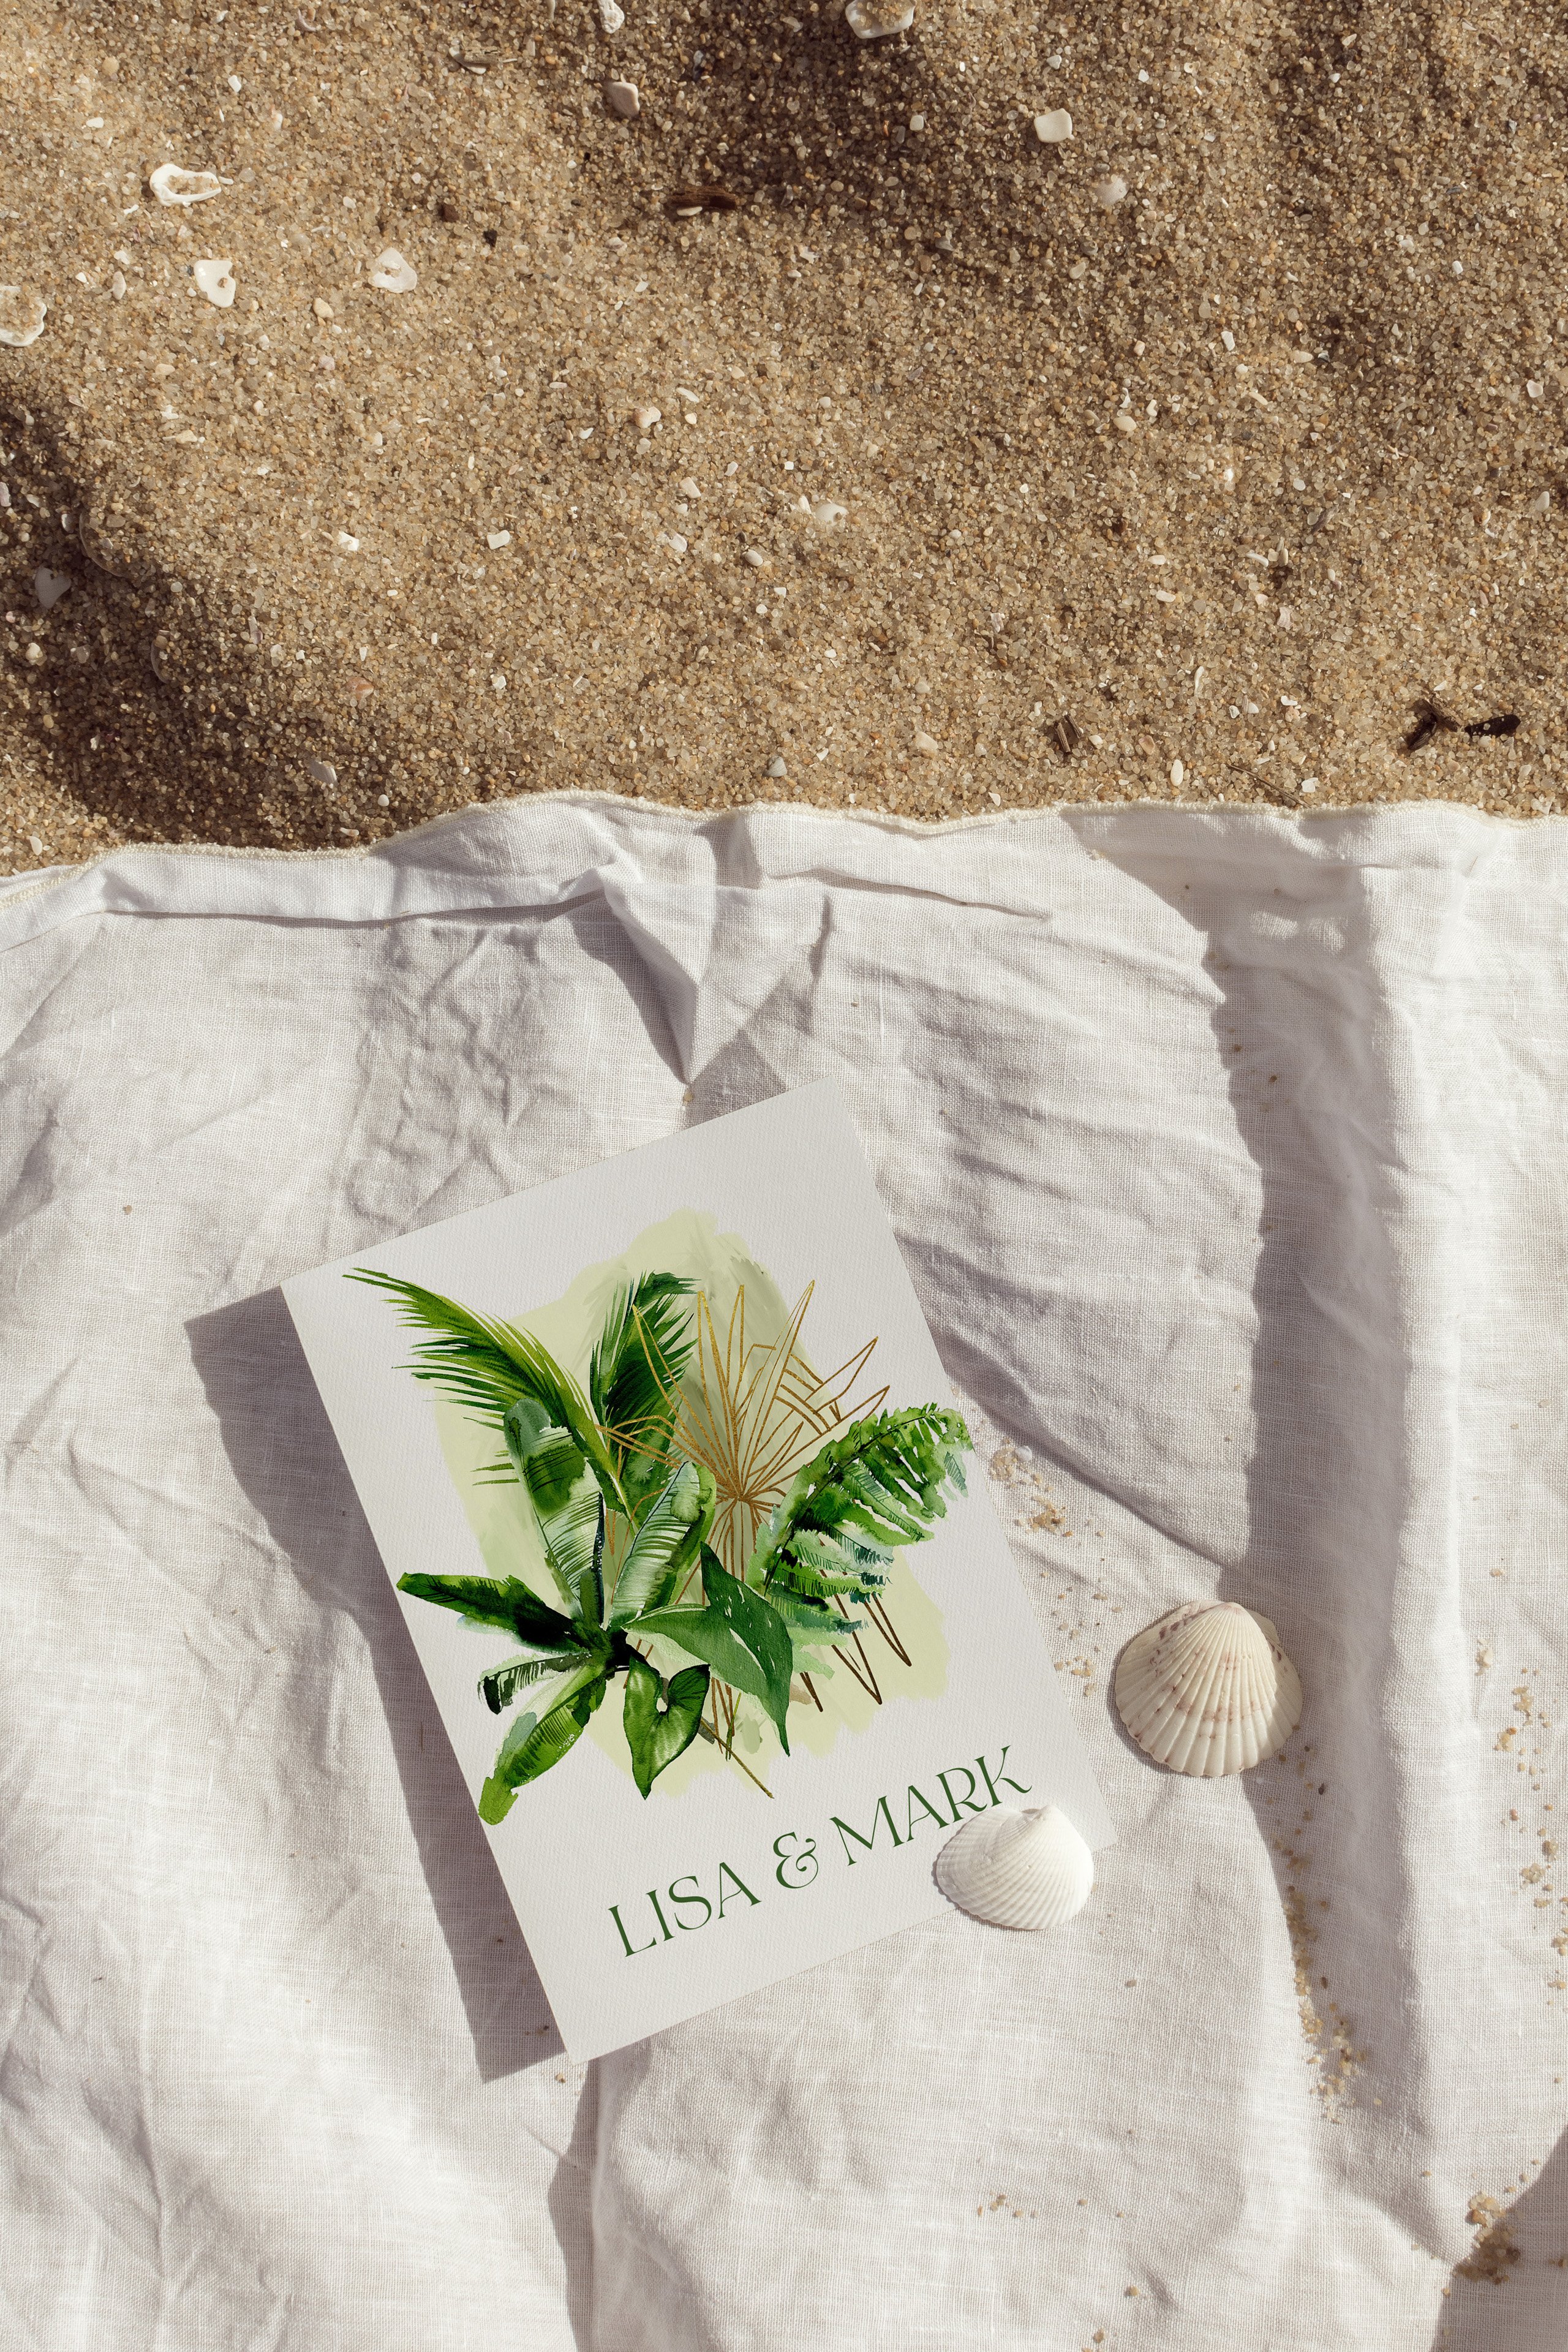 Picture of a plant and a seashell on a towel.